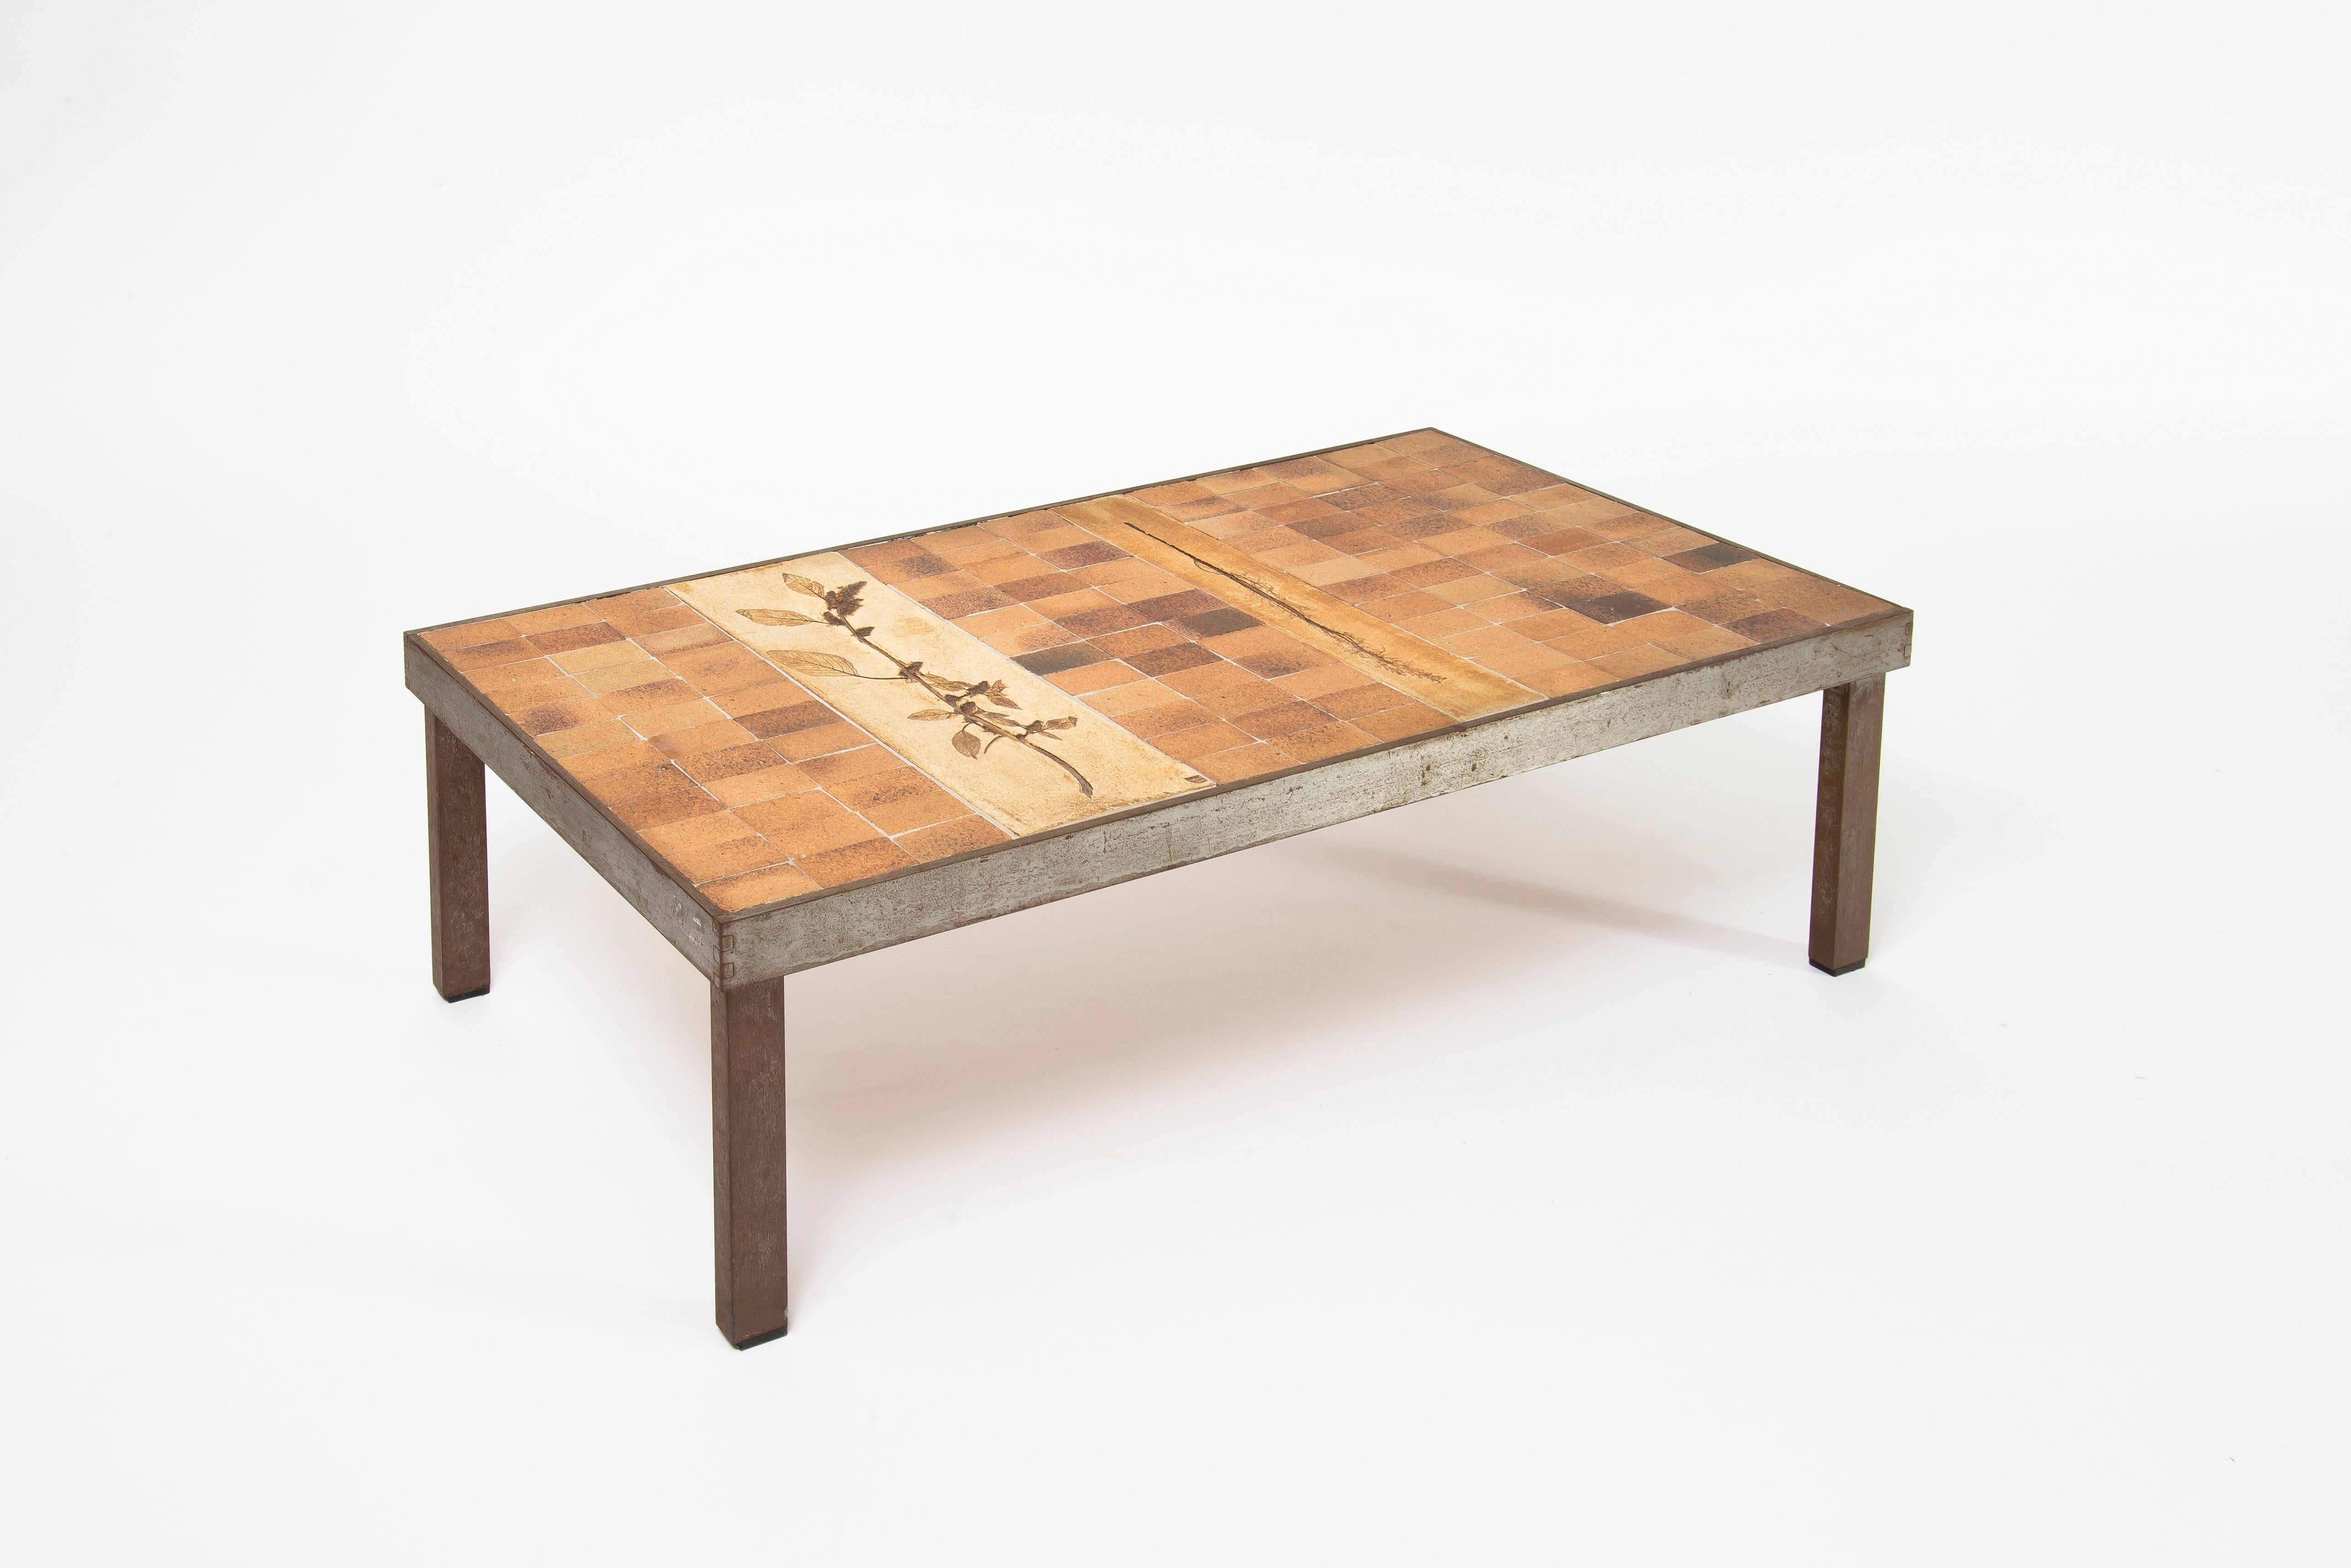 Low table from the "Garrigue" series by the French ceramicist Roger Capron in Vallauris. Ceramic tiles with an impressed branches decor and patined metal frame. Stamped marks (see last image).